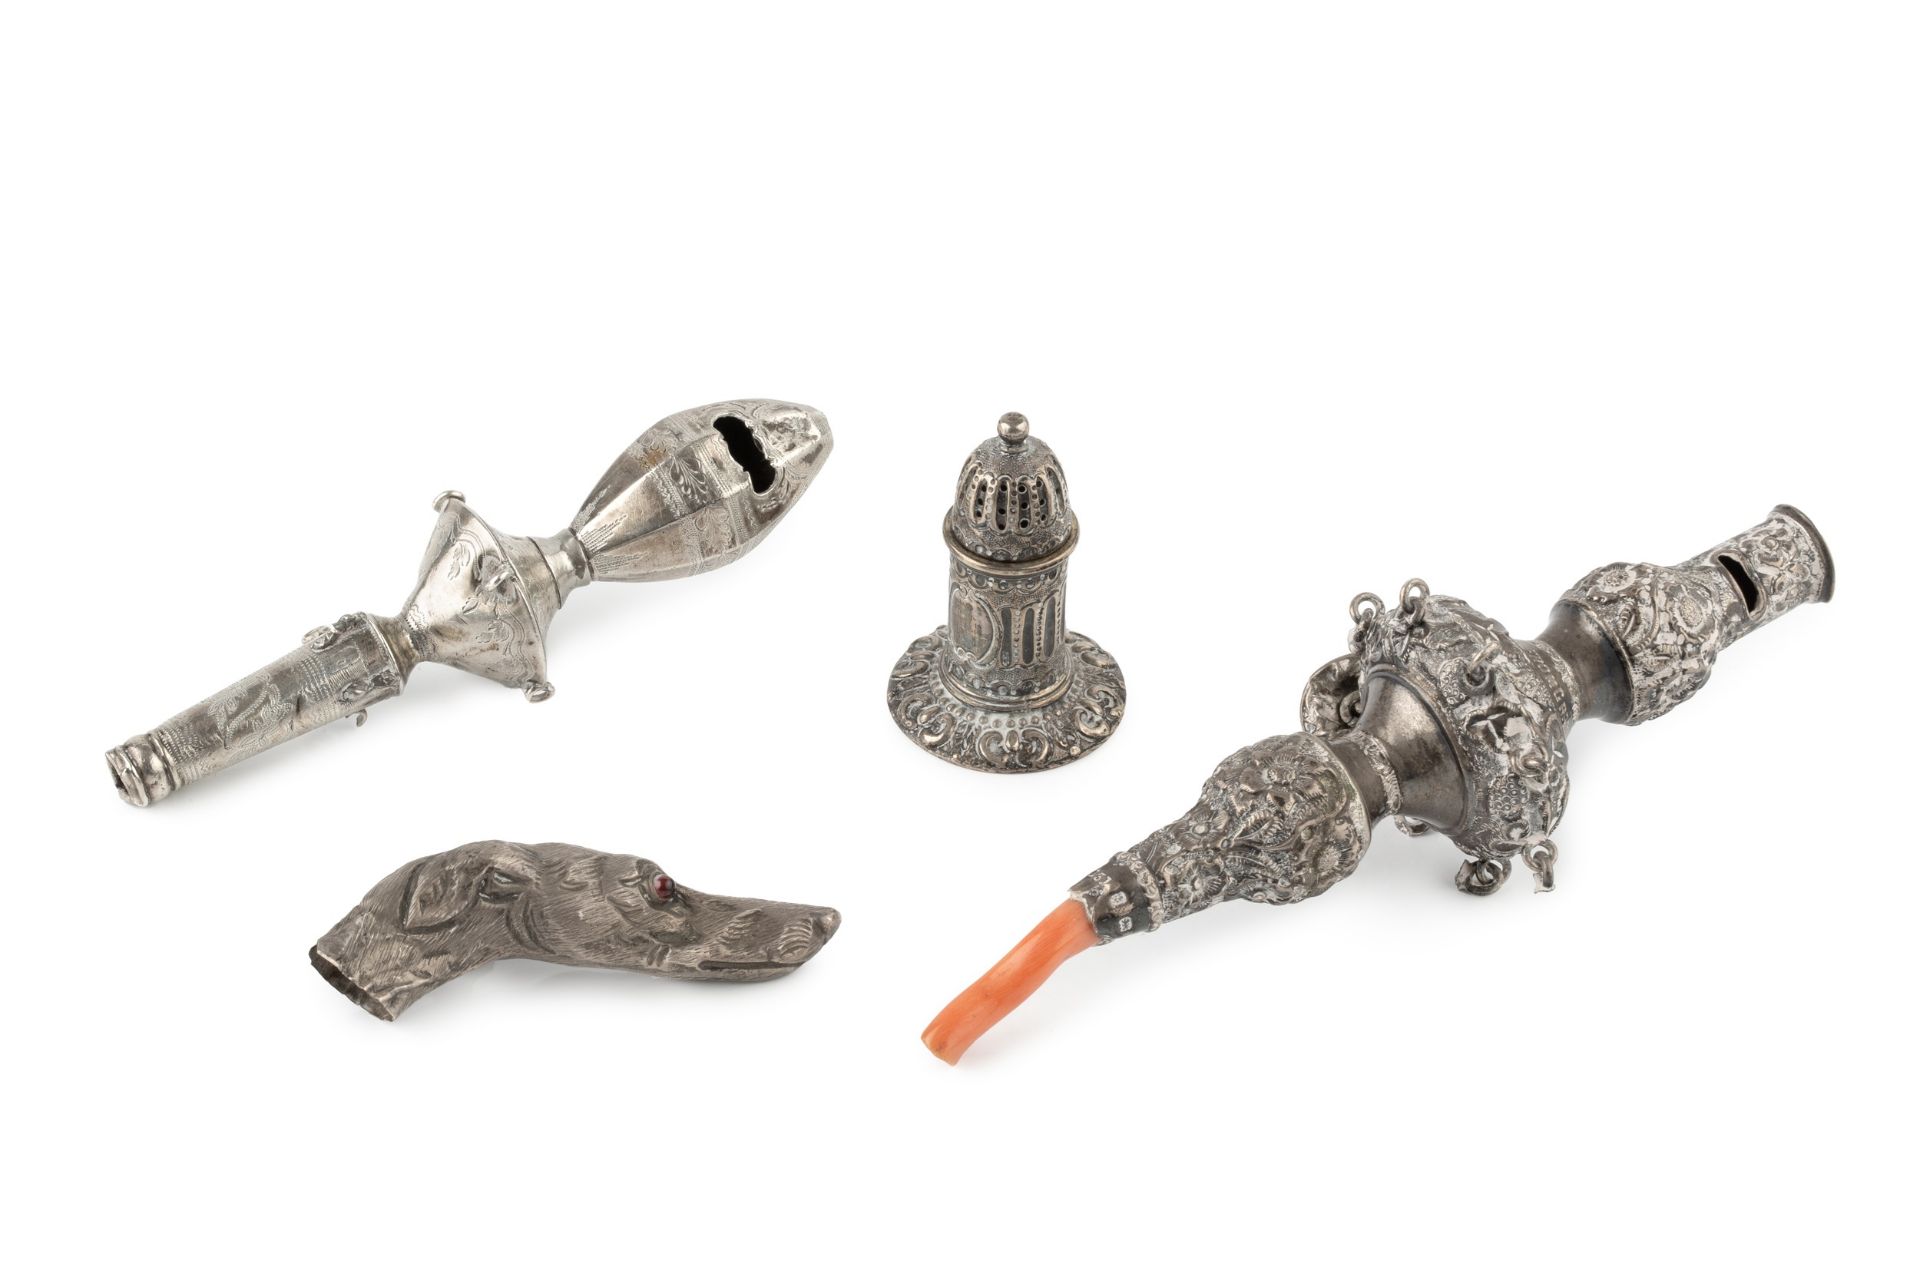 A late Victorian silver baby's rattle and whistle, with florally embossed decoration and coral